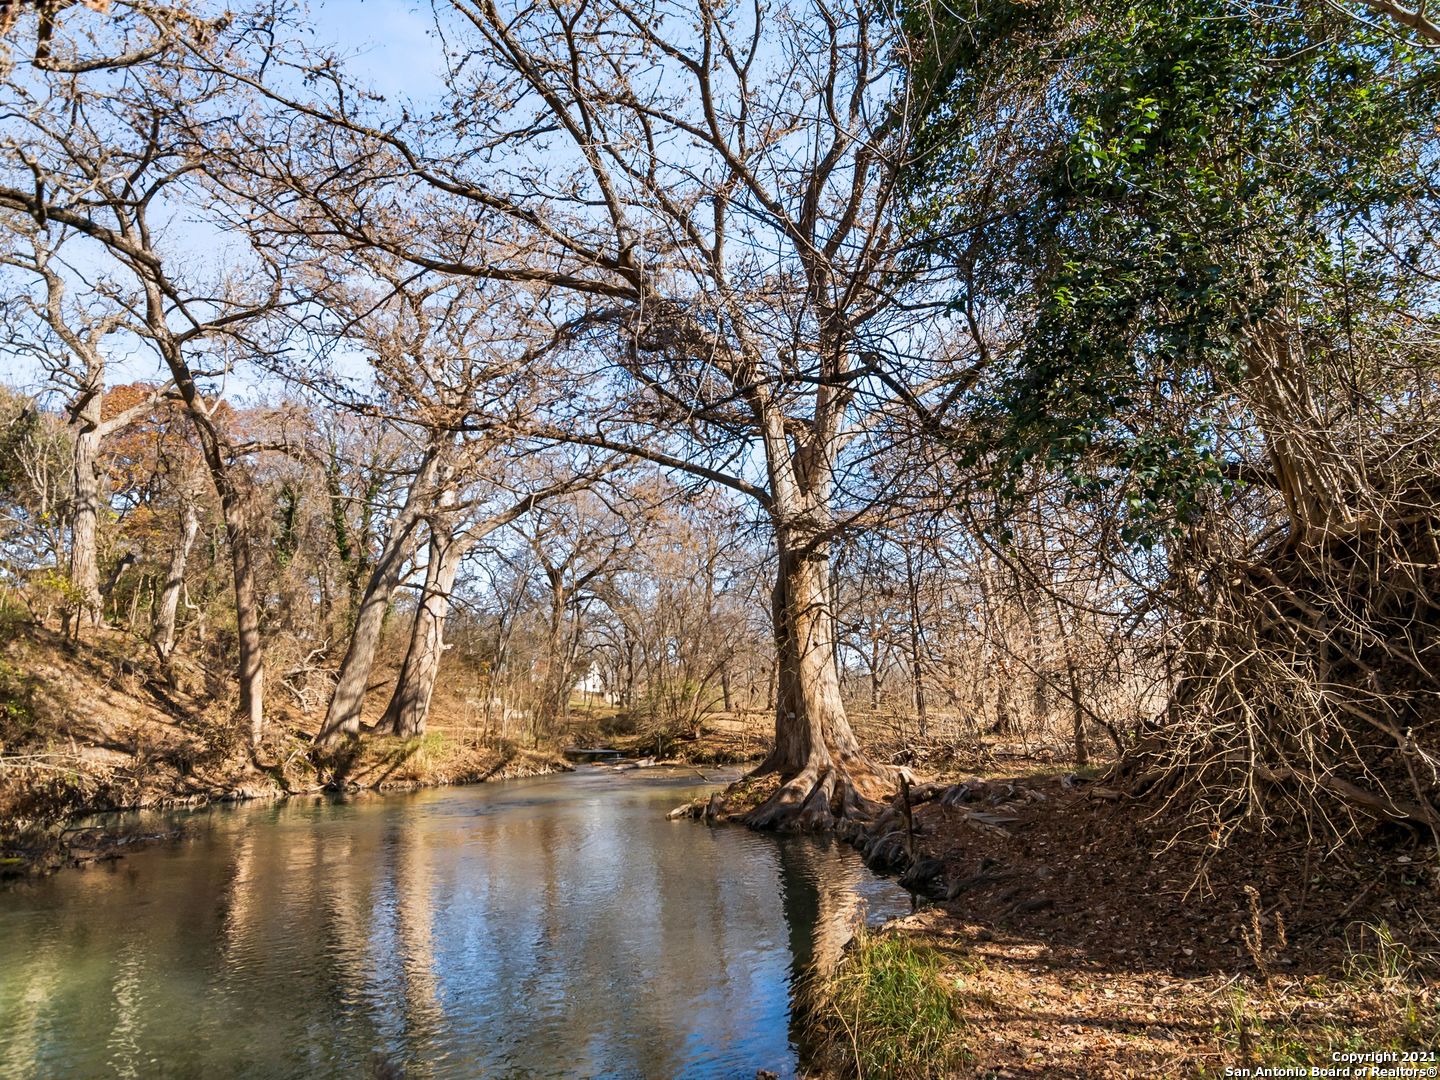 Here's your chance to own 6 acres of riverfront property in Castroville, Texas. The home on the property was built by the Schmitt Family, in 1885, who were some of the original founders of the town. Approximately 3 of the 6 acres are out of the FEMA flood plain. The property has approximately 470 ft of riverfront, and has a working well for irrigation.